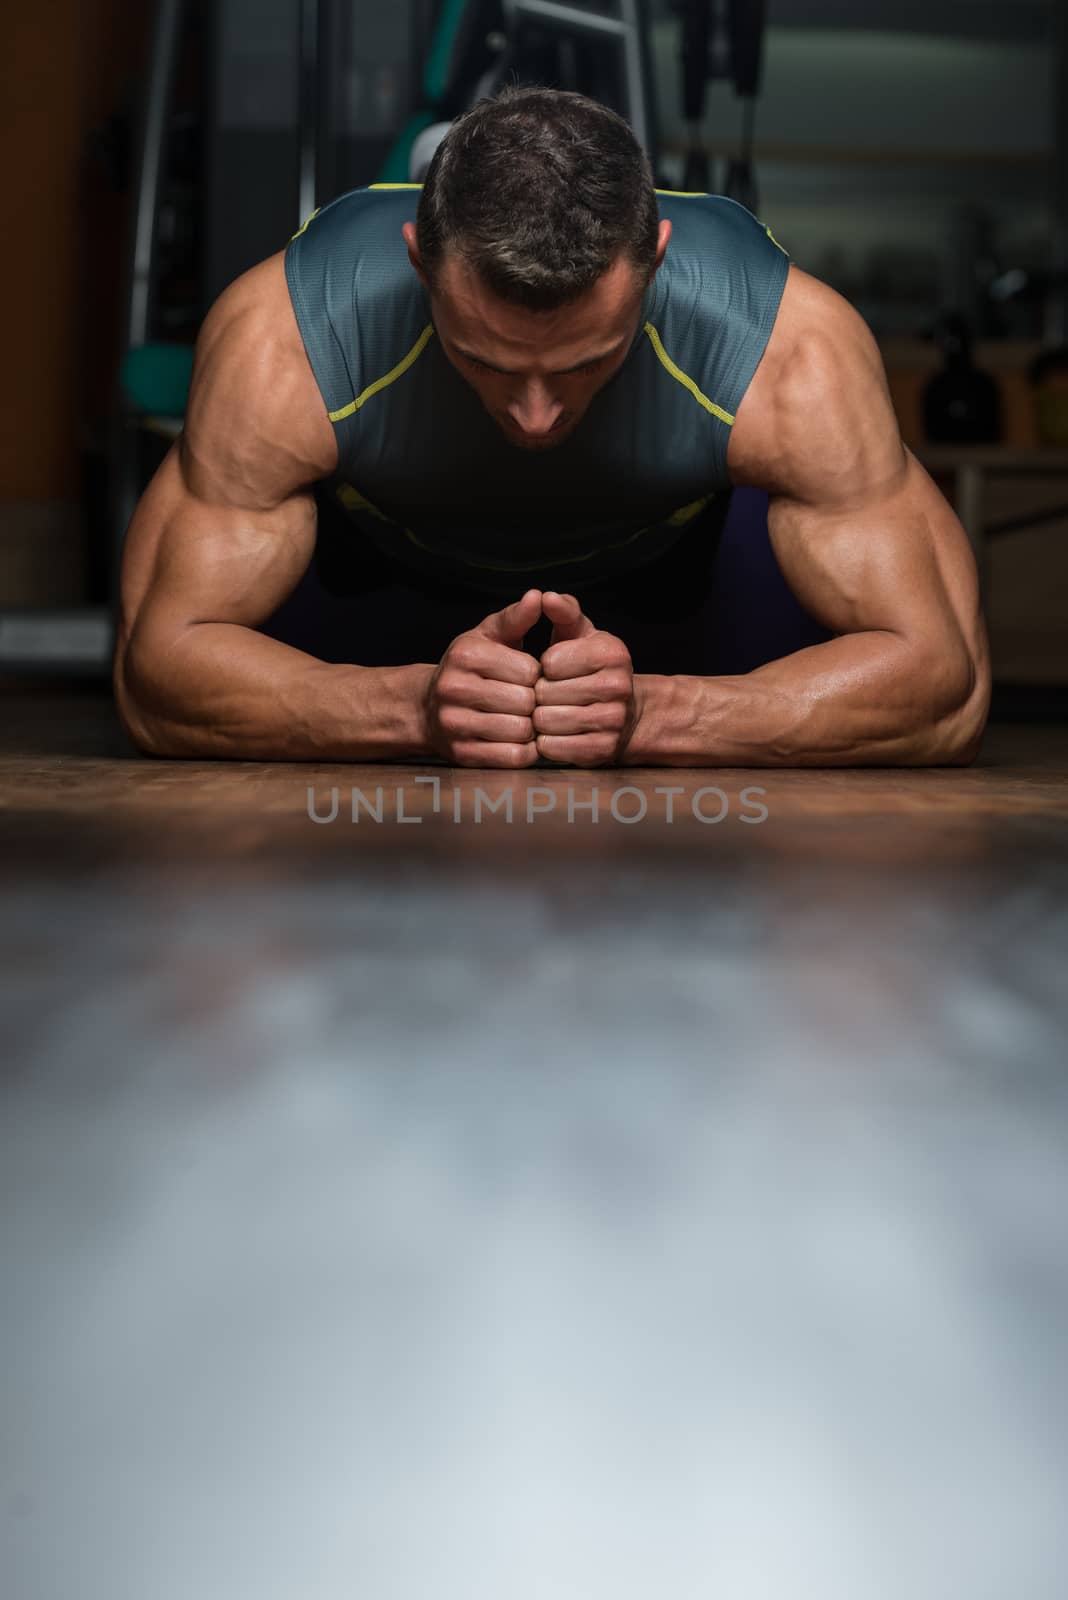 Young Athlete Doing Pushups As Part Of Bodybuilding Training